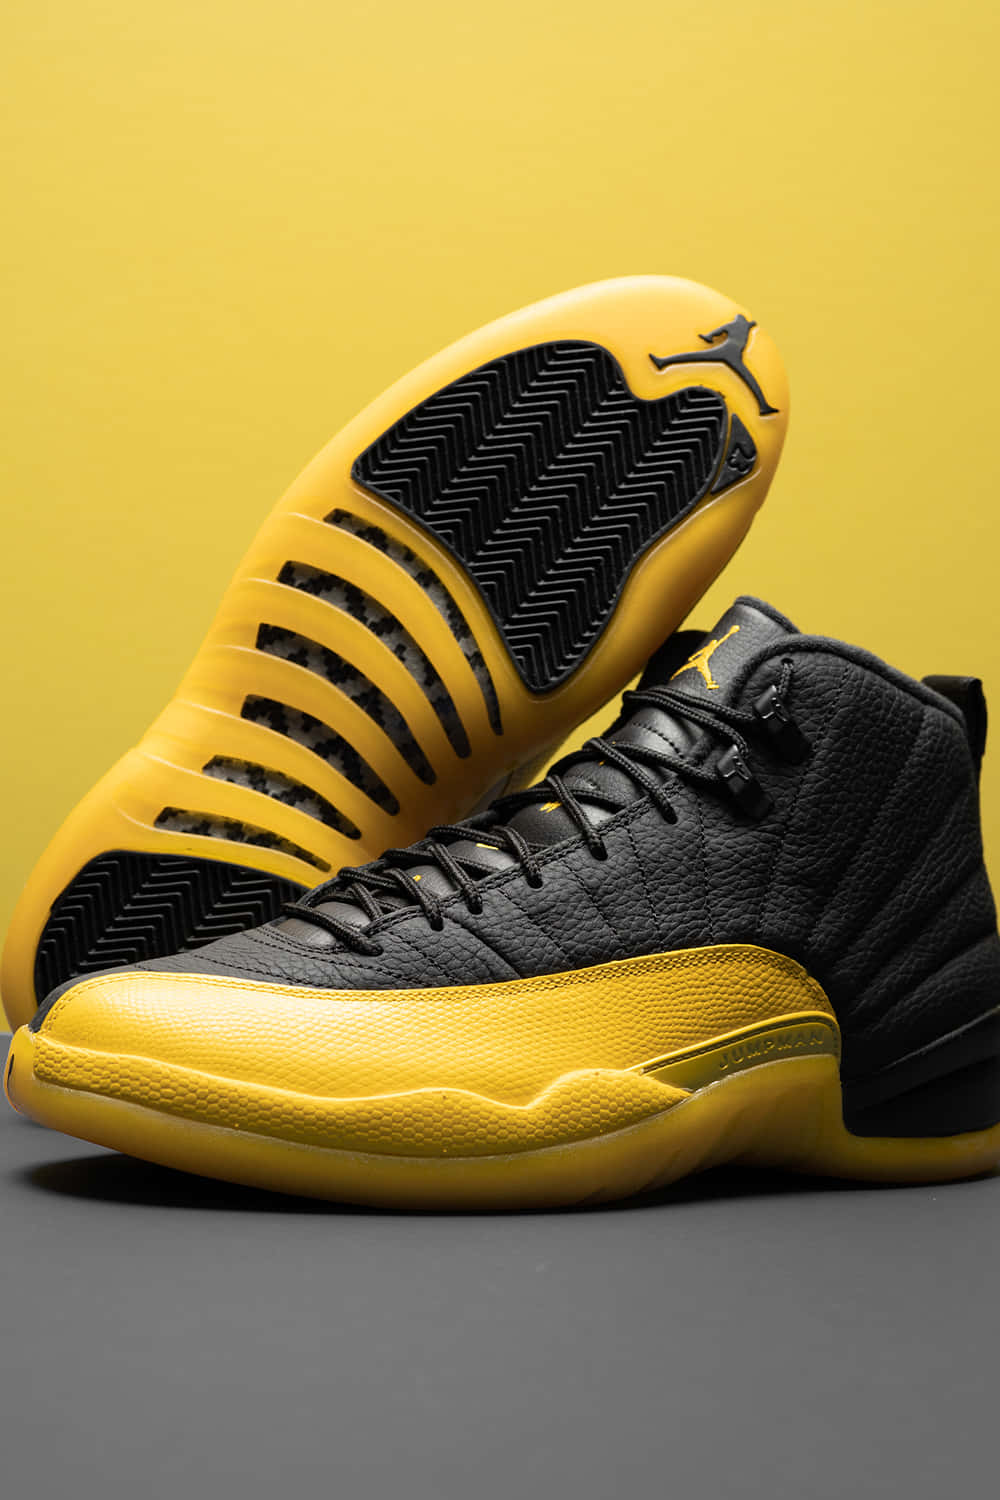 Show Off Your Style with the Classic Yellow Jordan Wallpaper